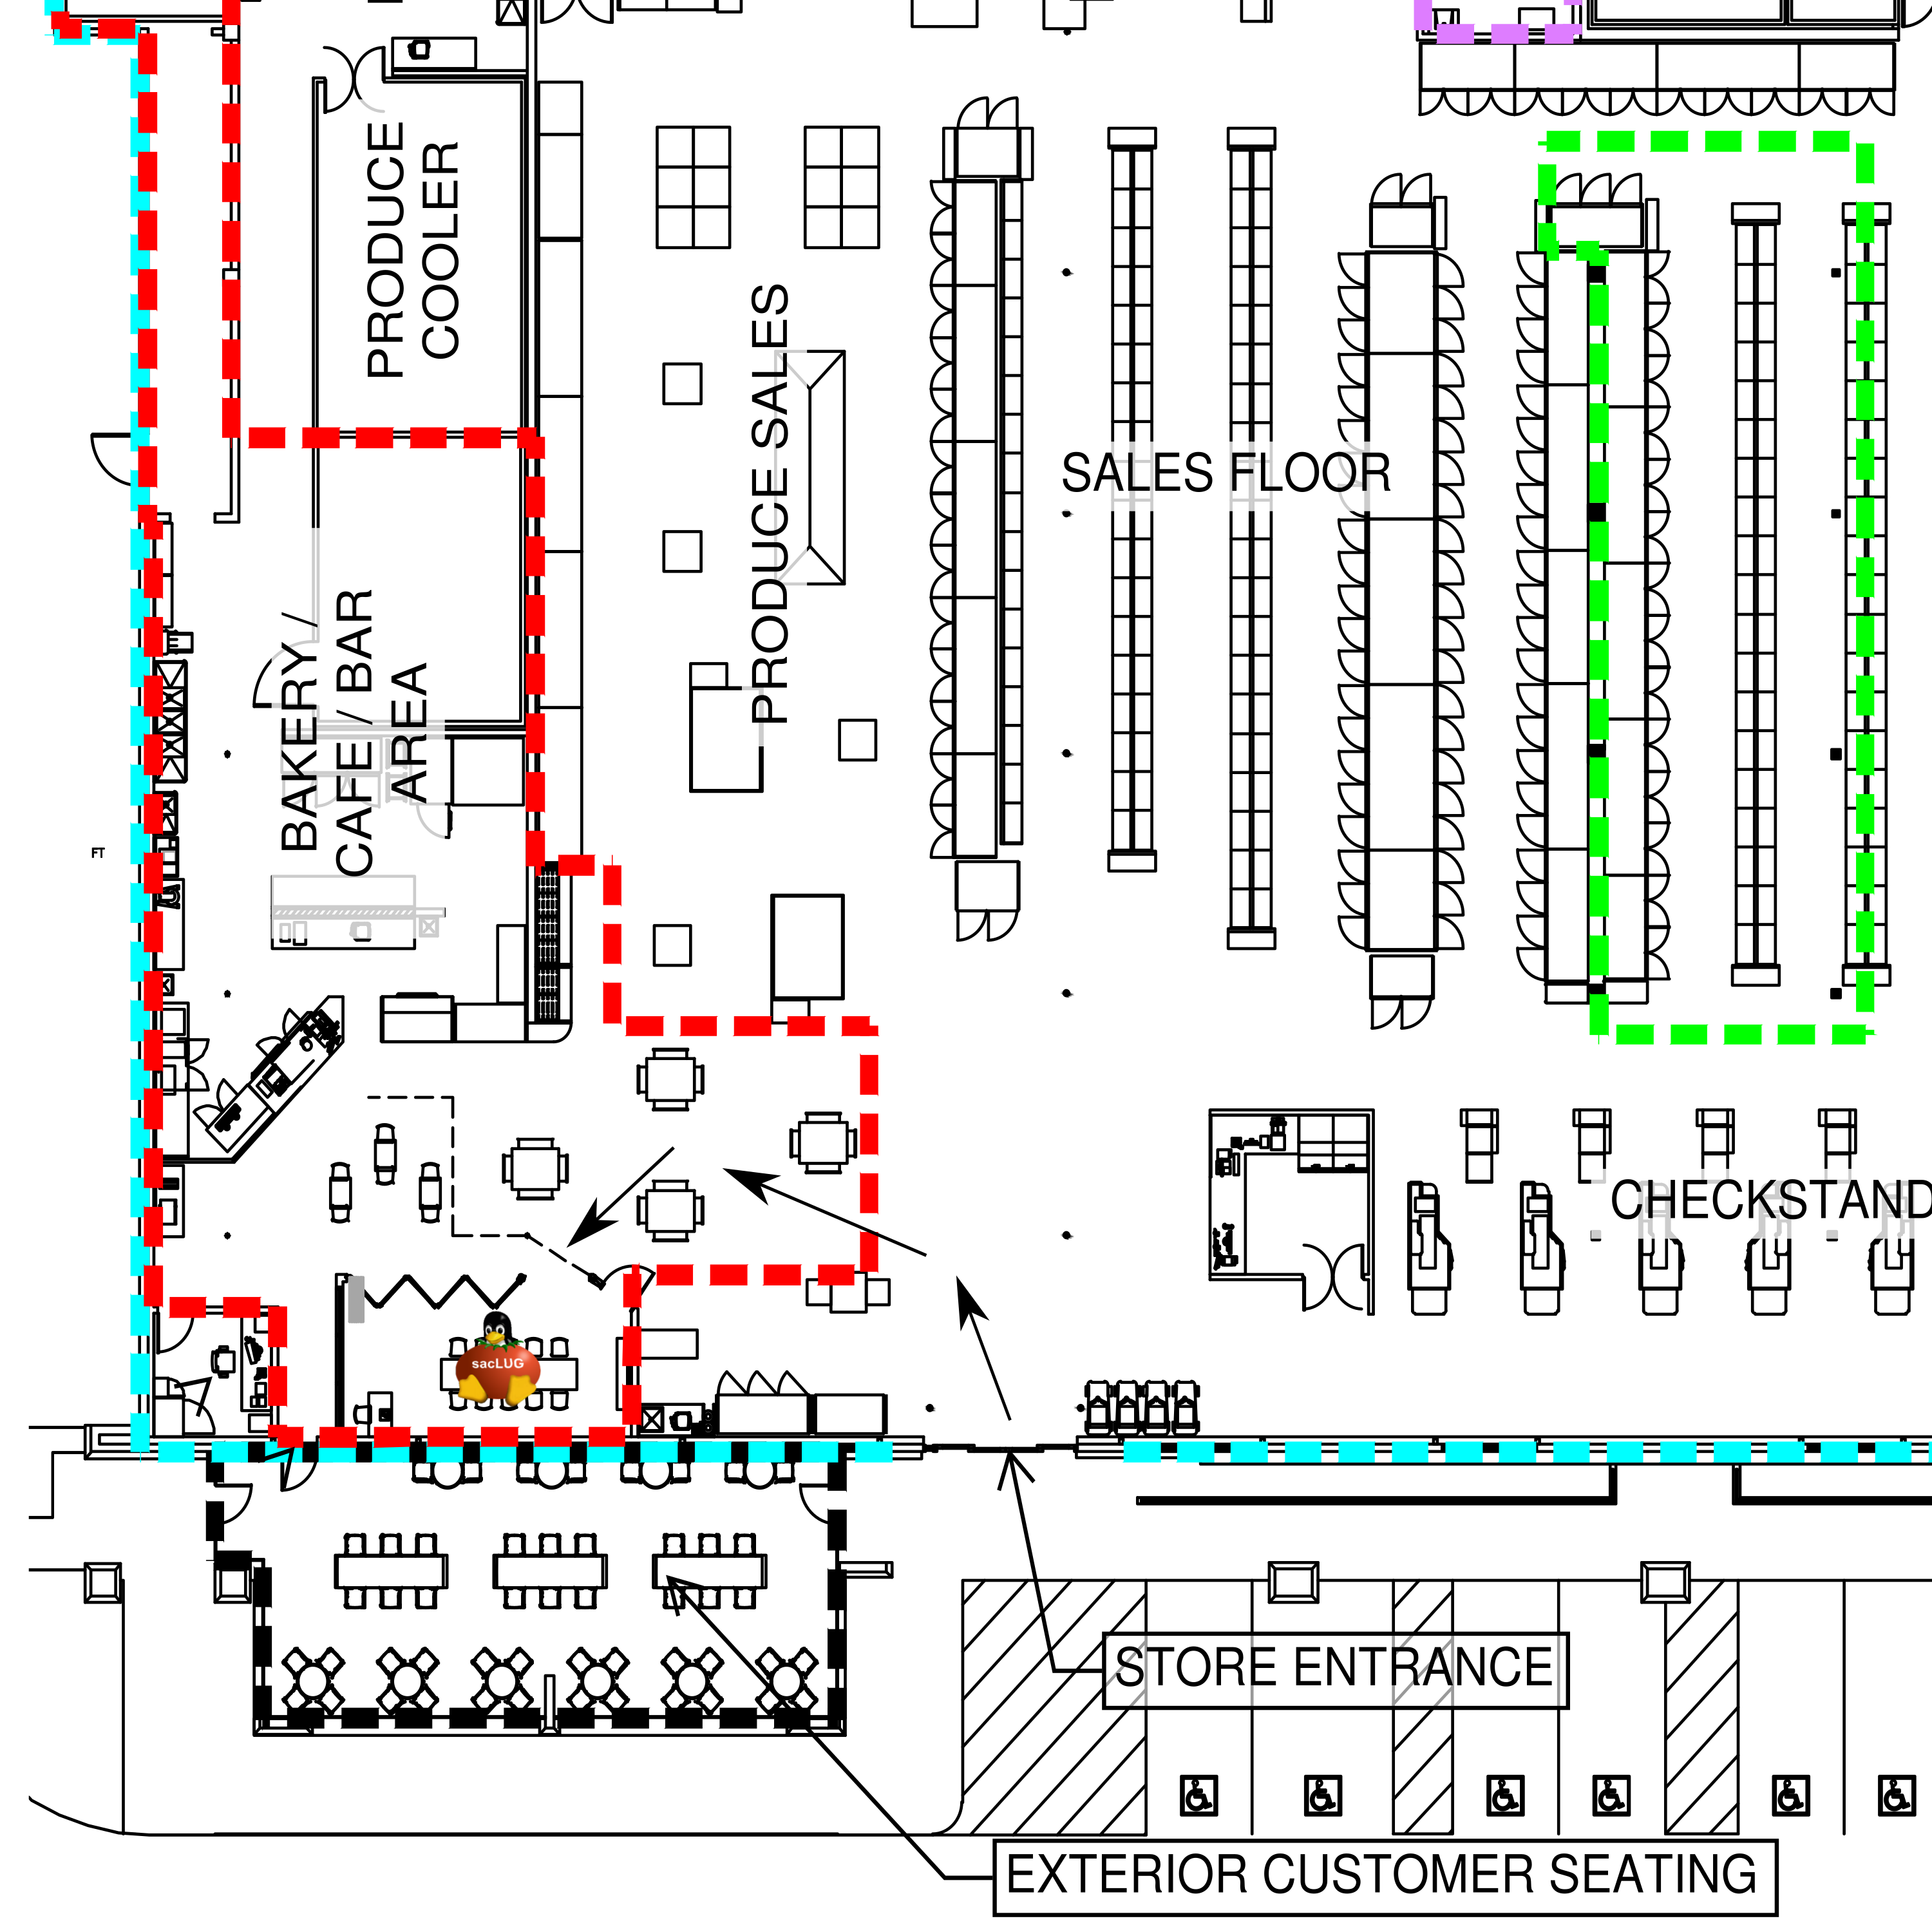 pictographic map showing path from outside bel air market to meeting room